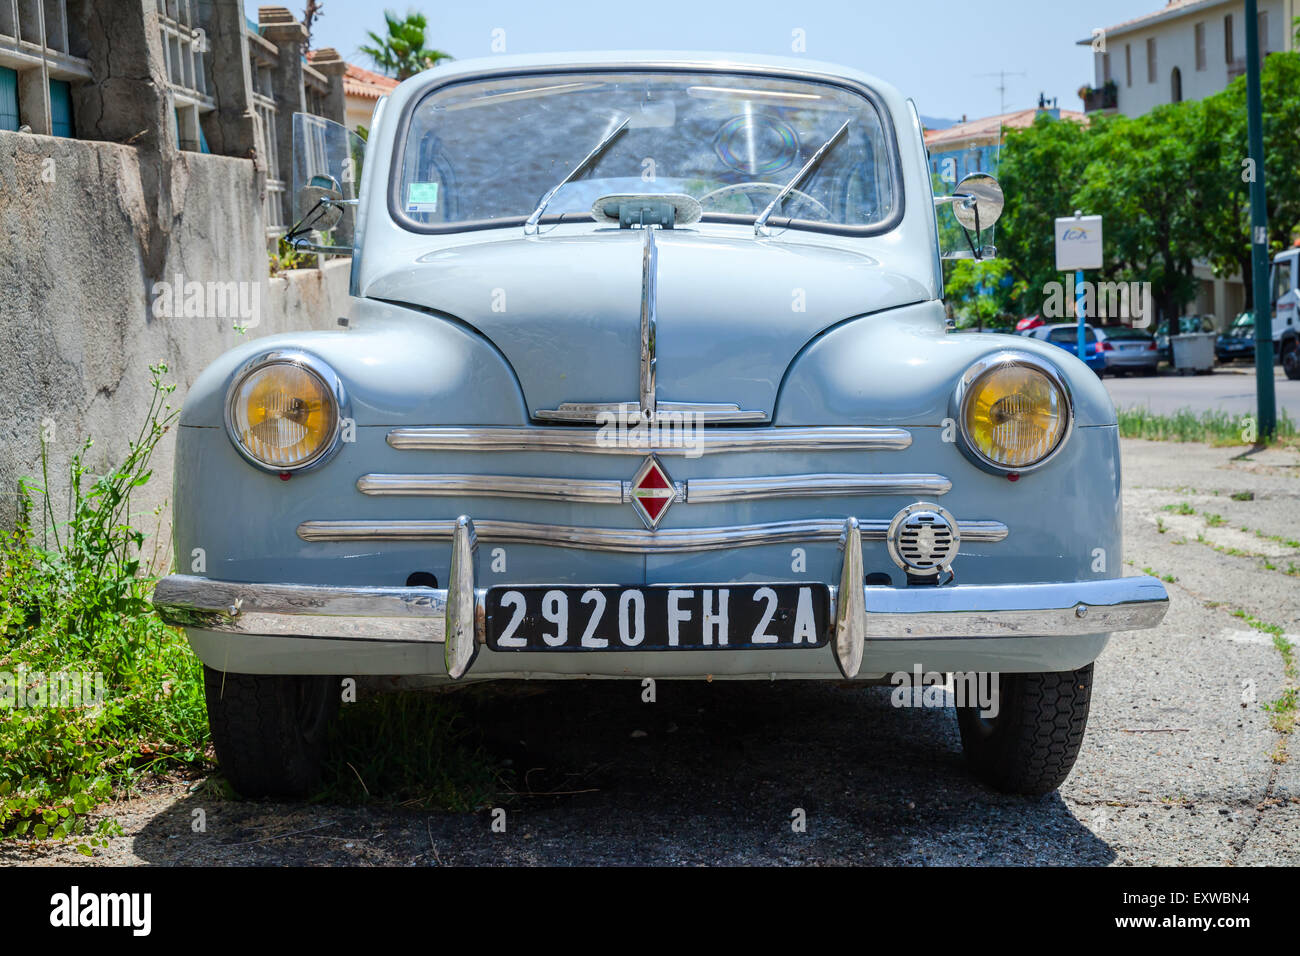 Ajaccio, France - July 6, 2015: Light blue Renault 4CV old-timer economy car stands parked on a roadside in French town, front v Stock Photo